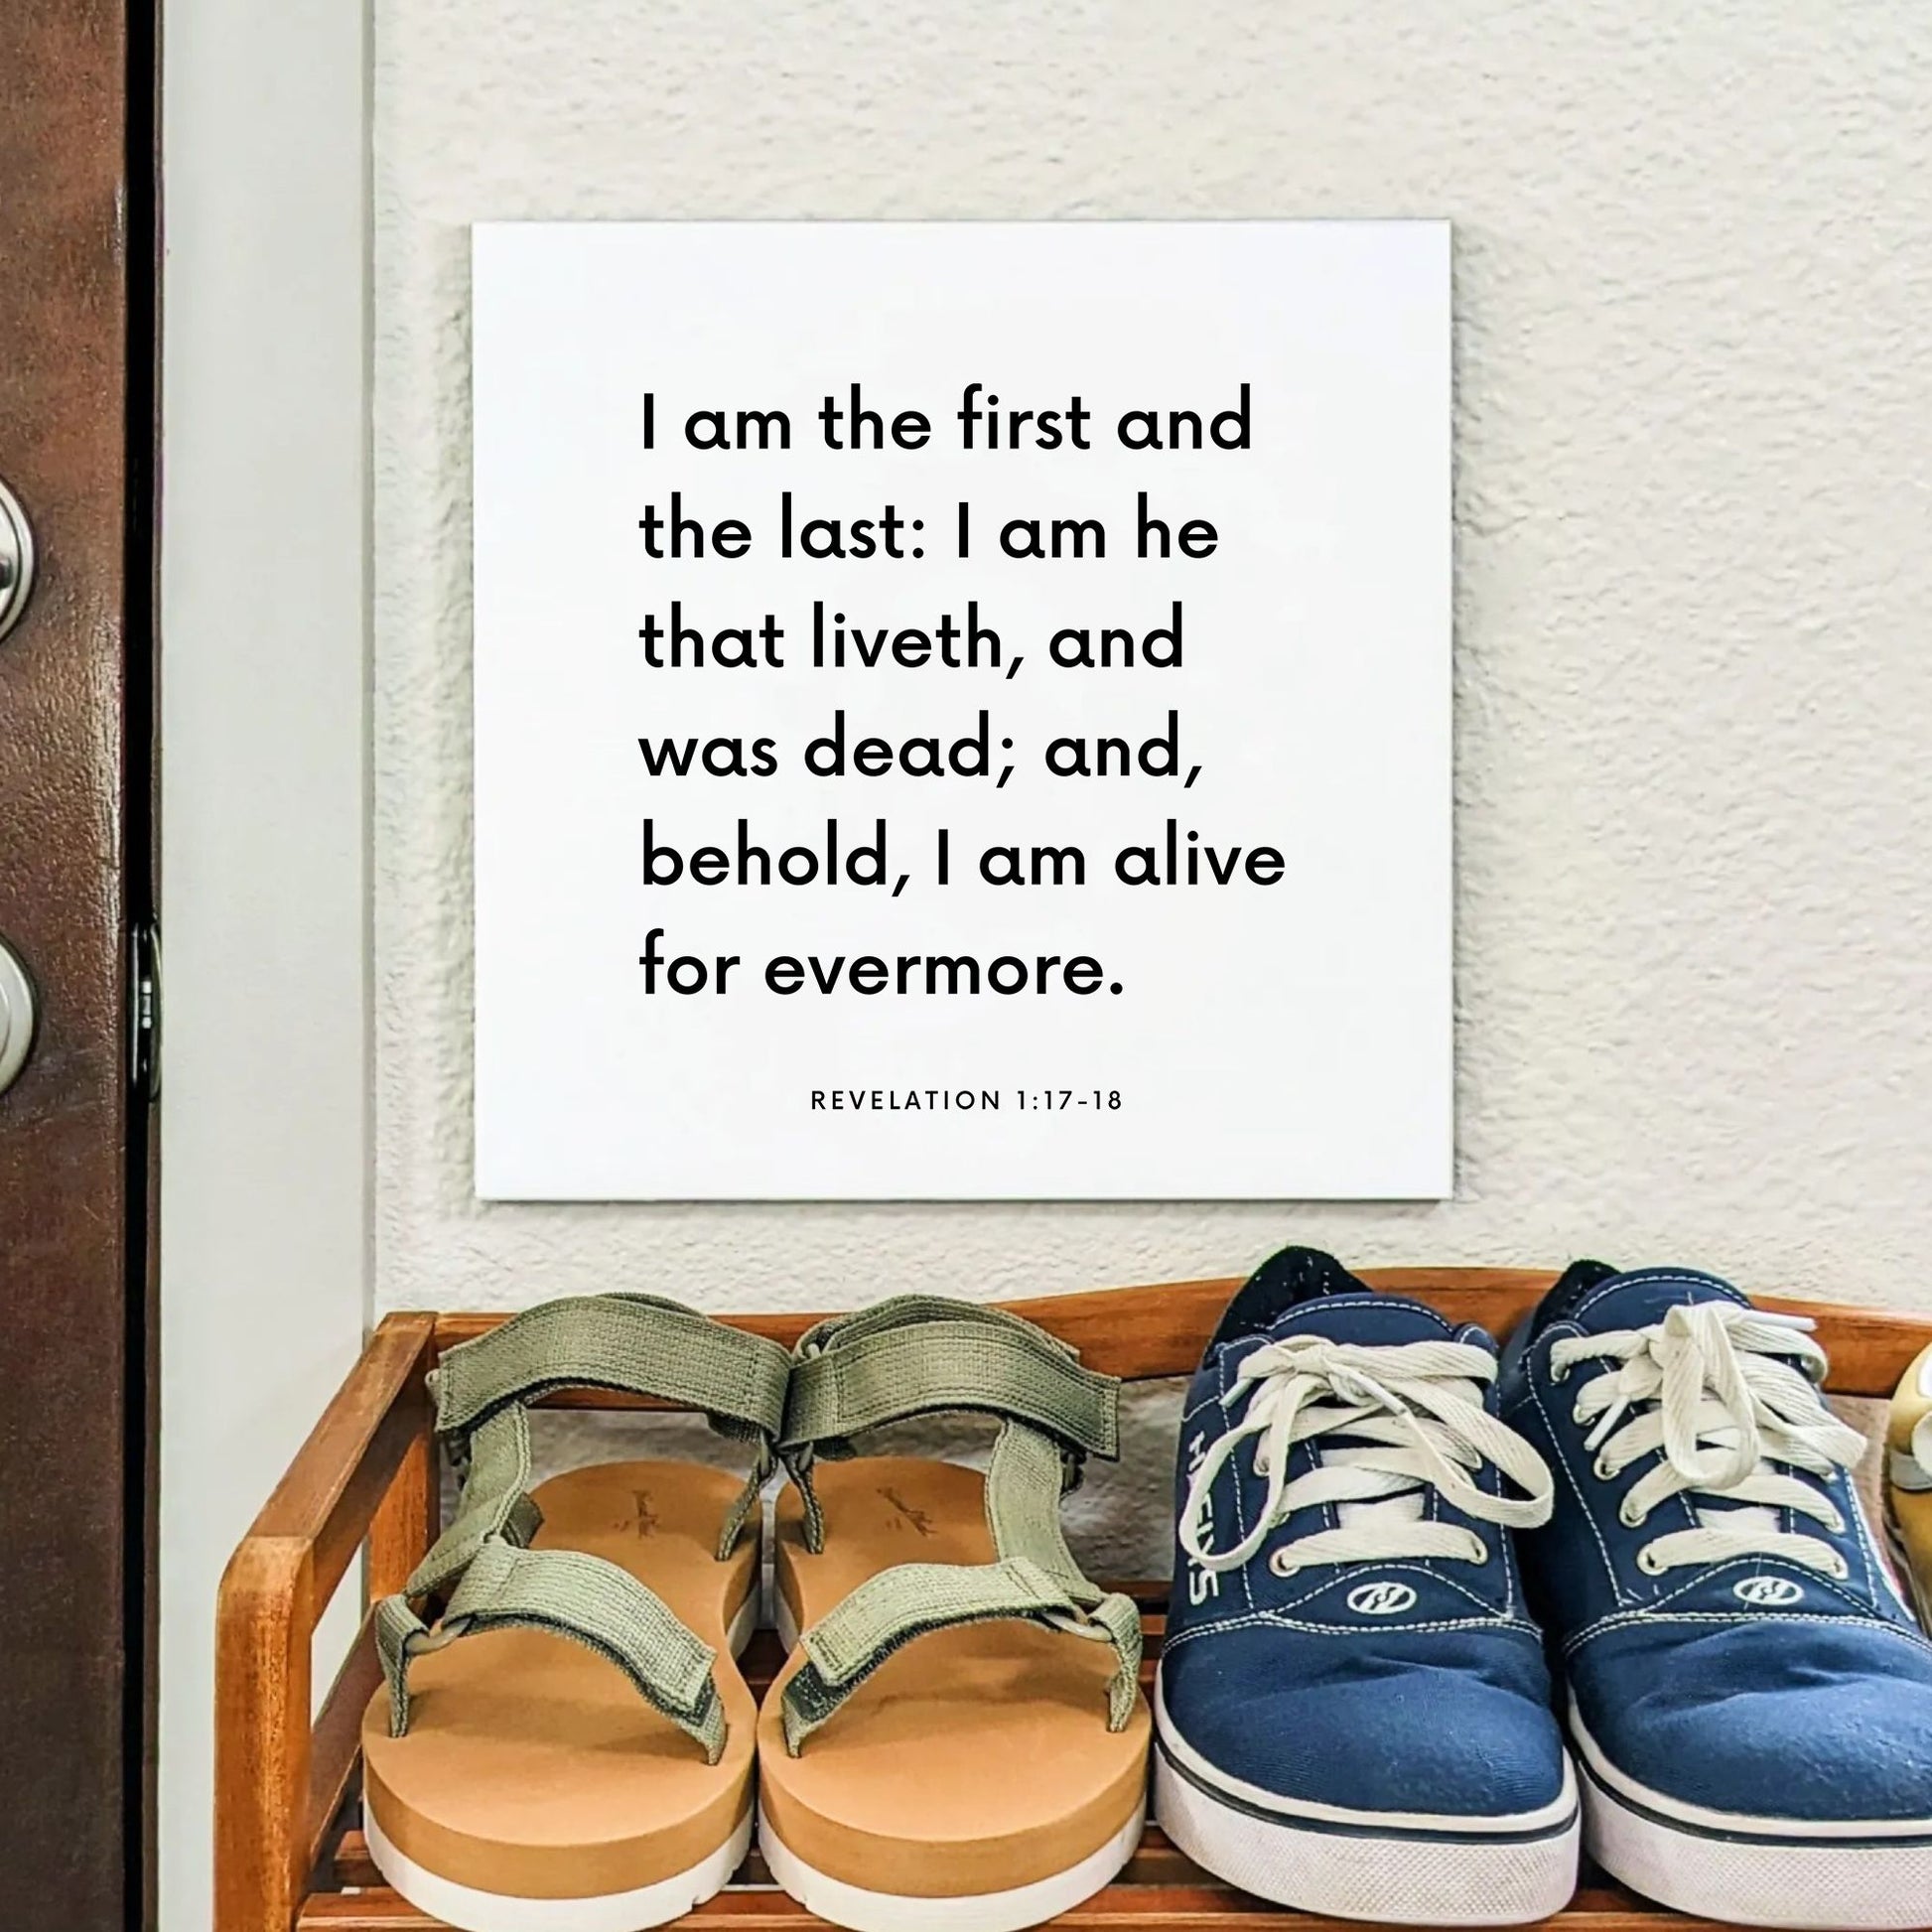 Shoes mouting of the scripture tile for Revelation 1:17-18 - "I am the first and the last: I am he that liveth"